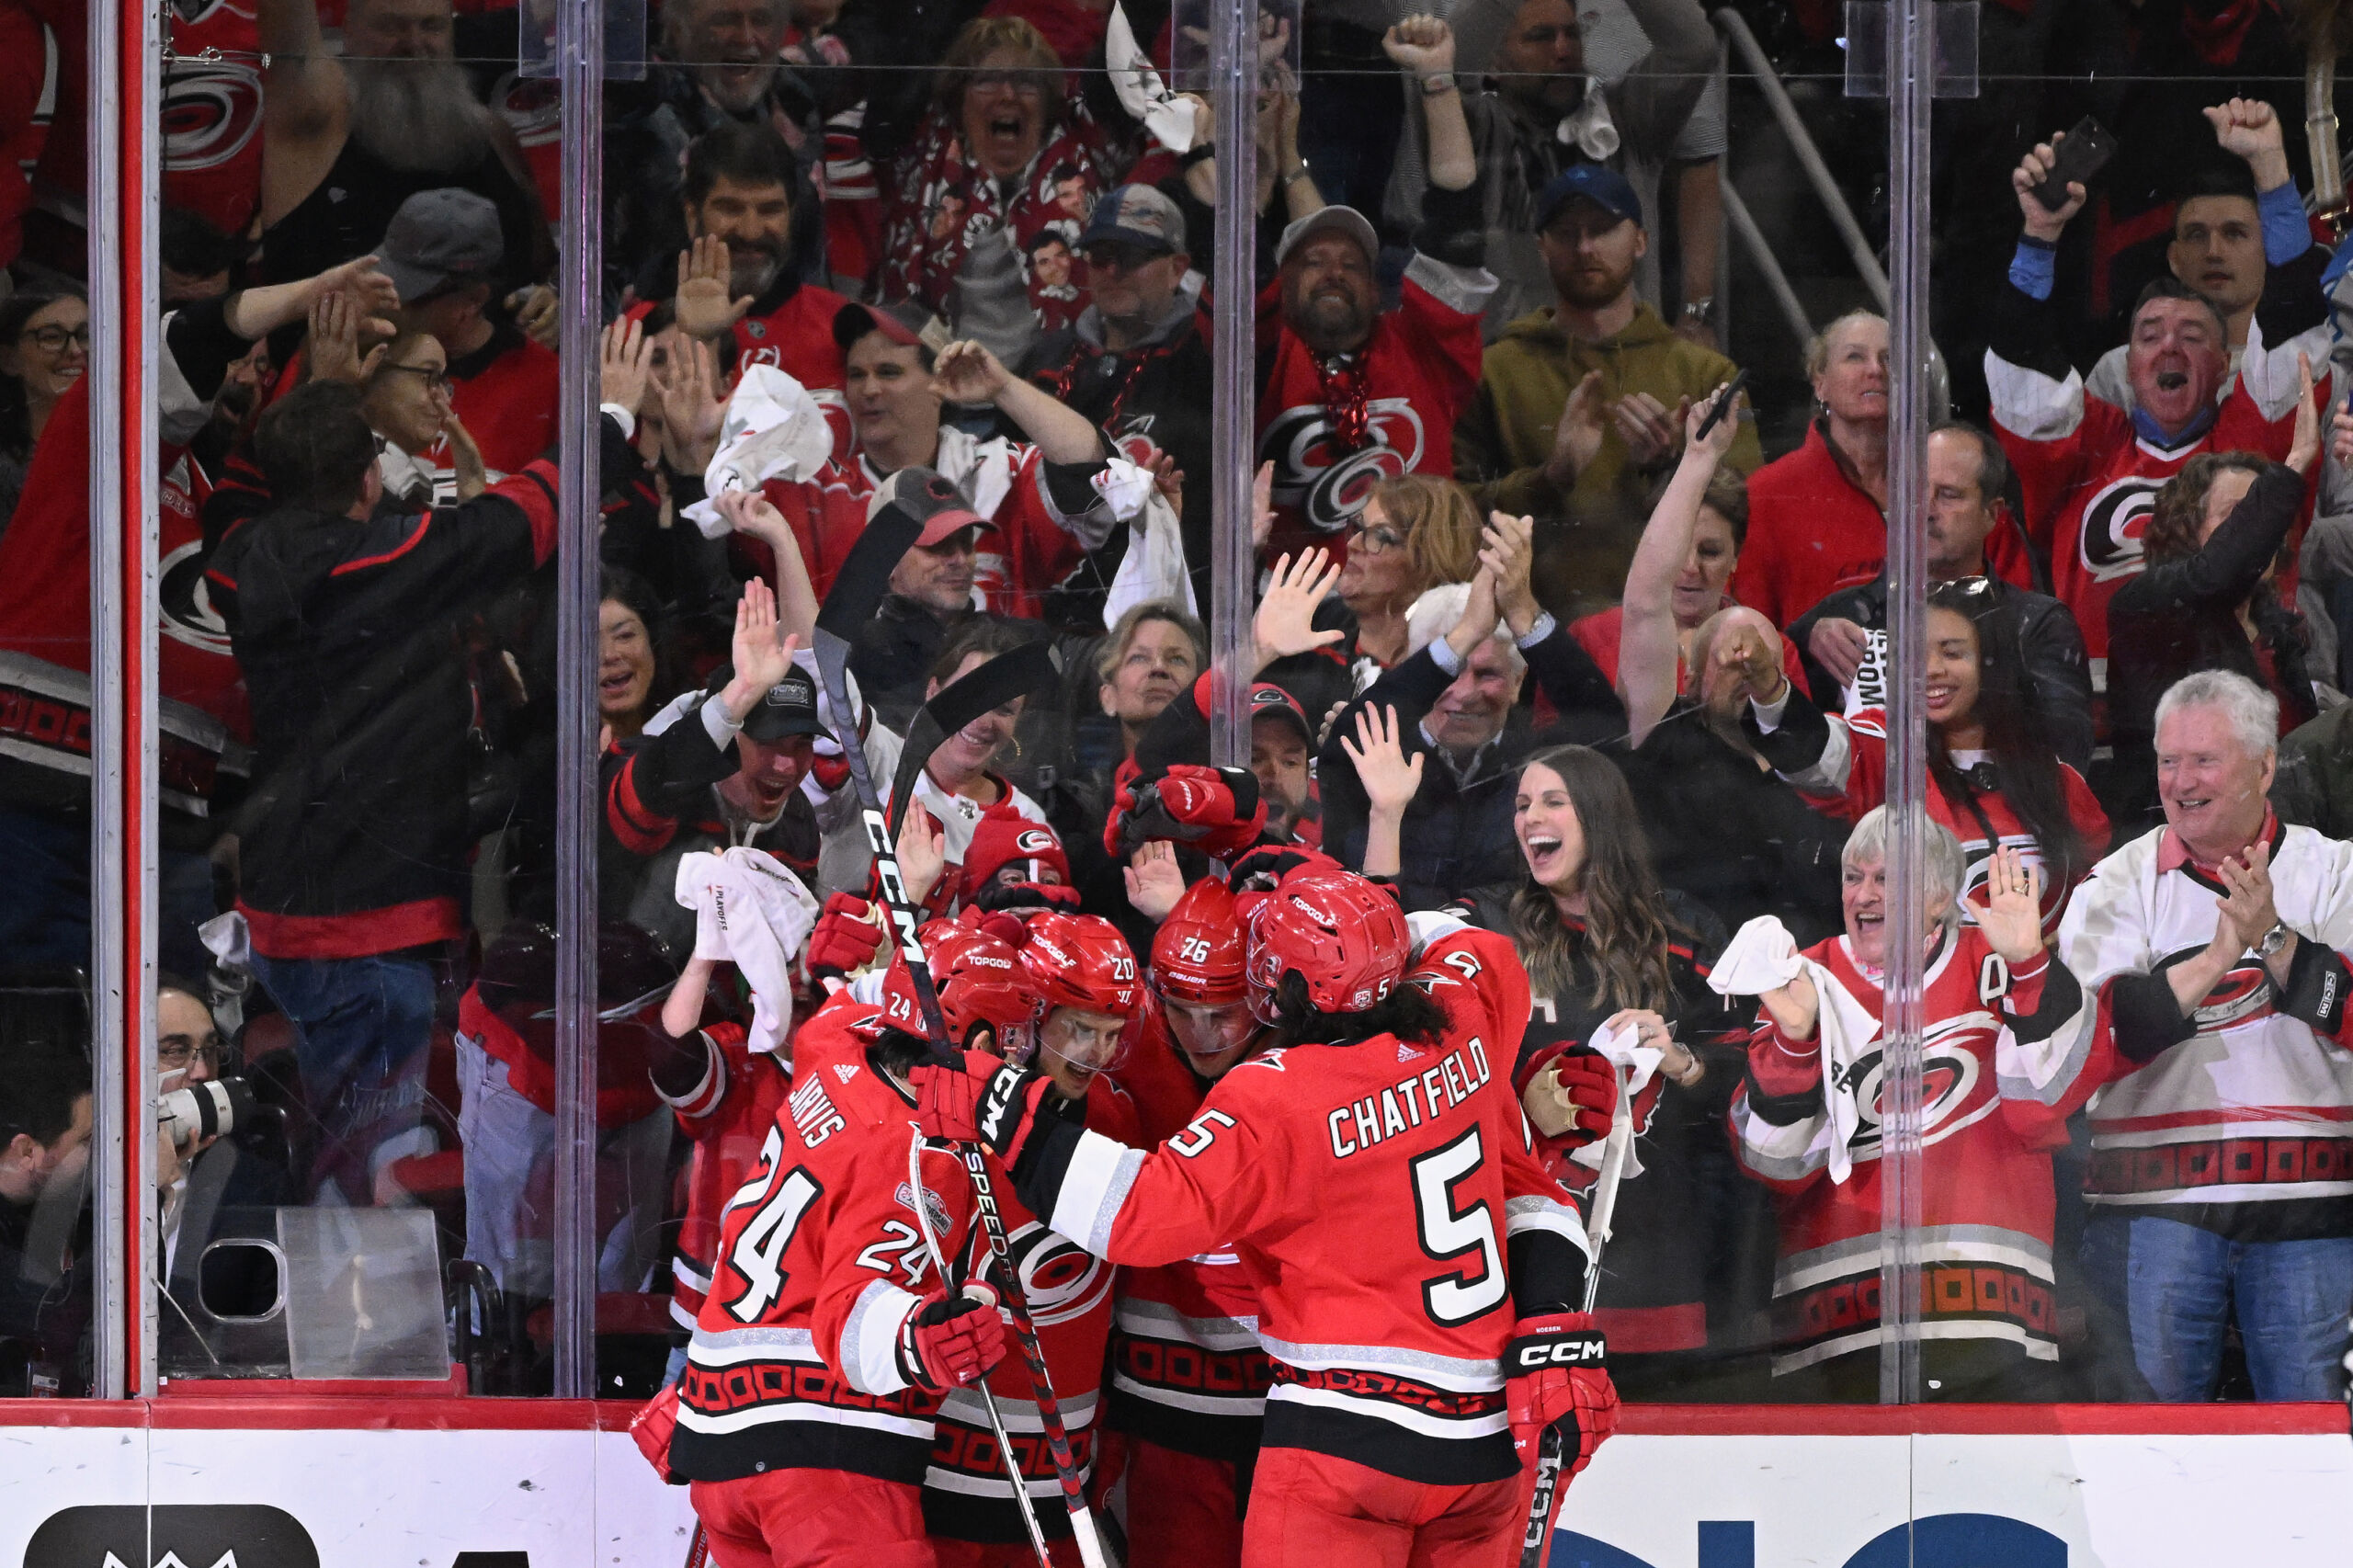 Carolina Hurricanes @ New Jersey Devils: Lineups and Game